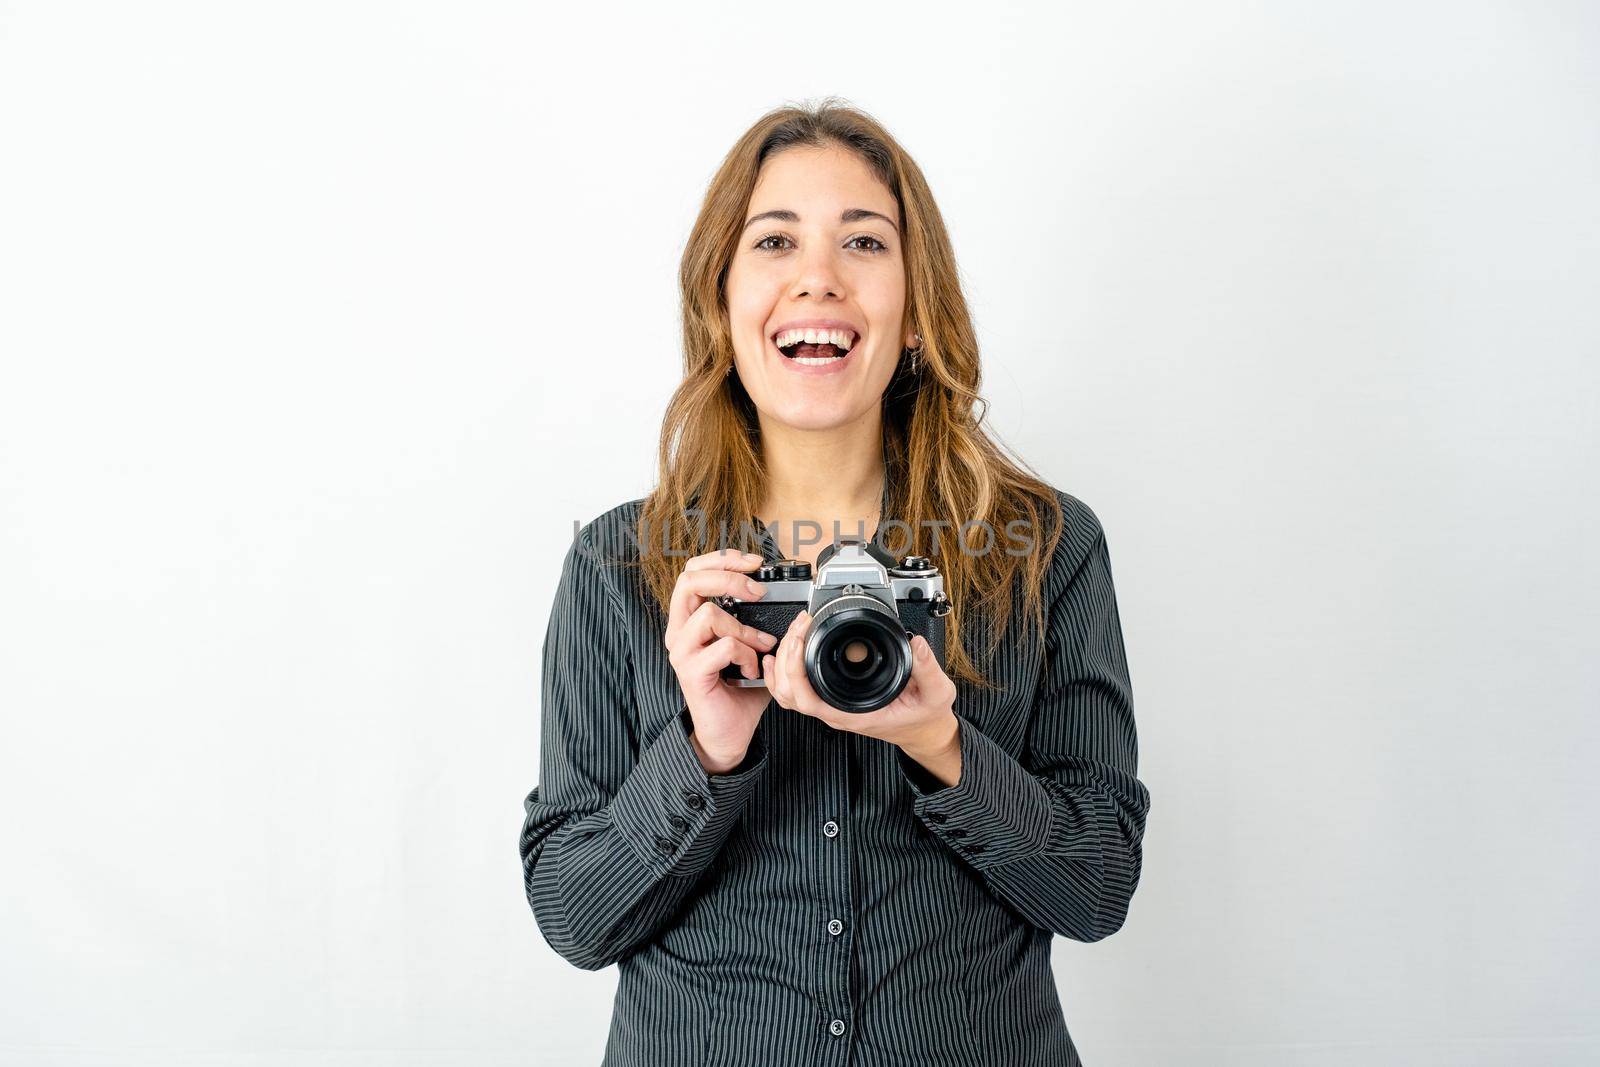 Studio shot of smiling happy young woman holding an old vintage photo camera watching photographer on white background for copy space. Concept of passion for imaging and history of classic photography by robbyfontanesi